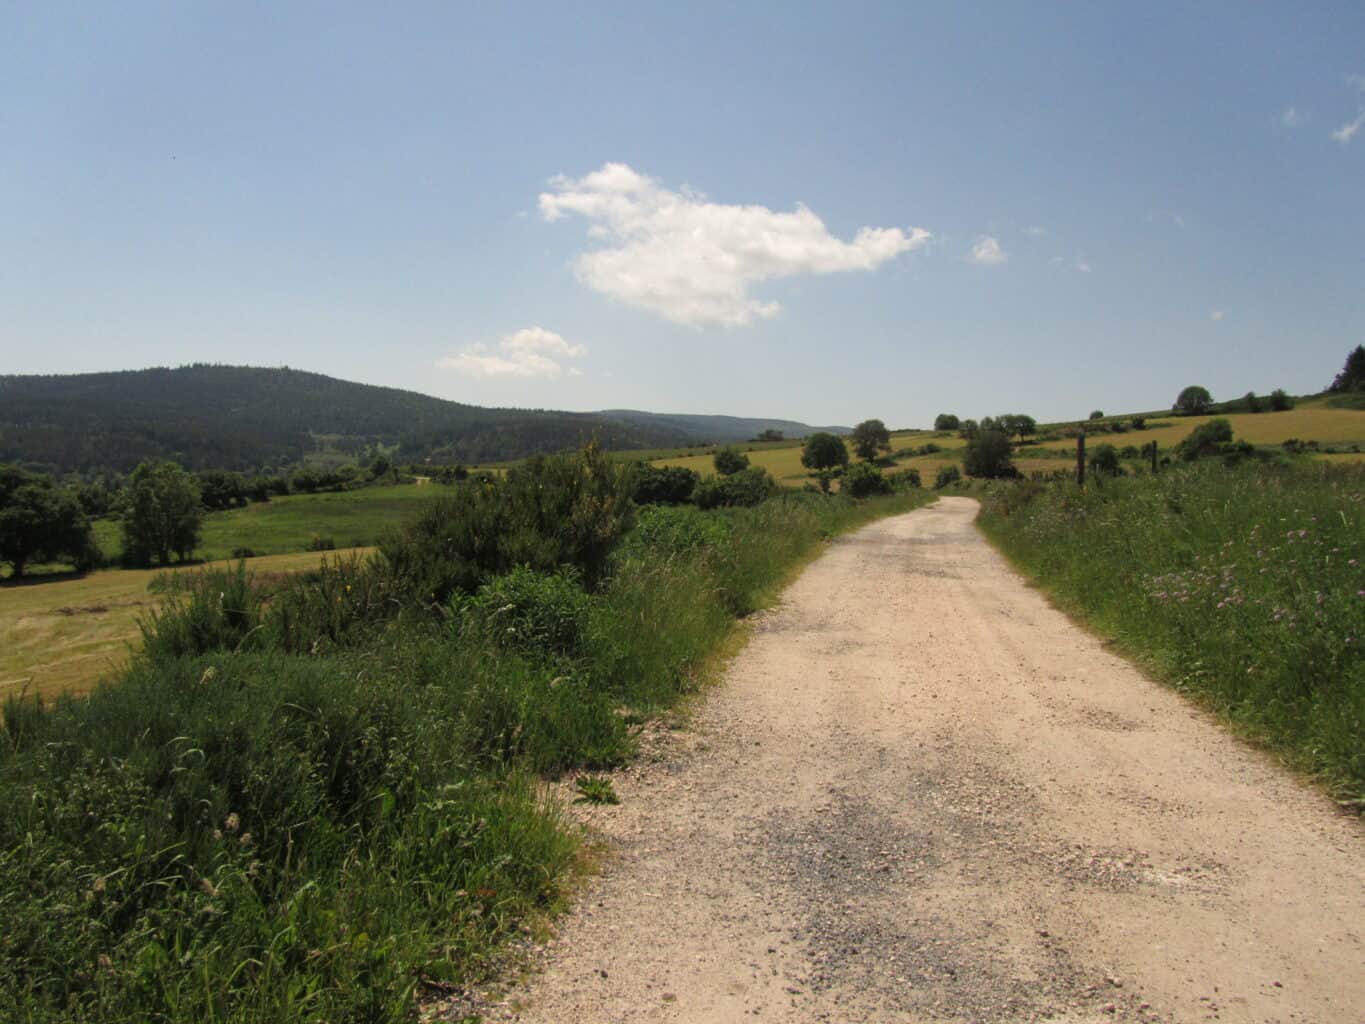 The camino on the plateau 